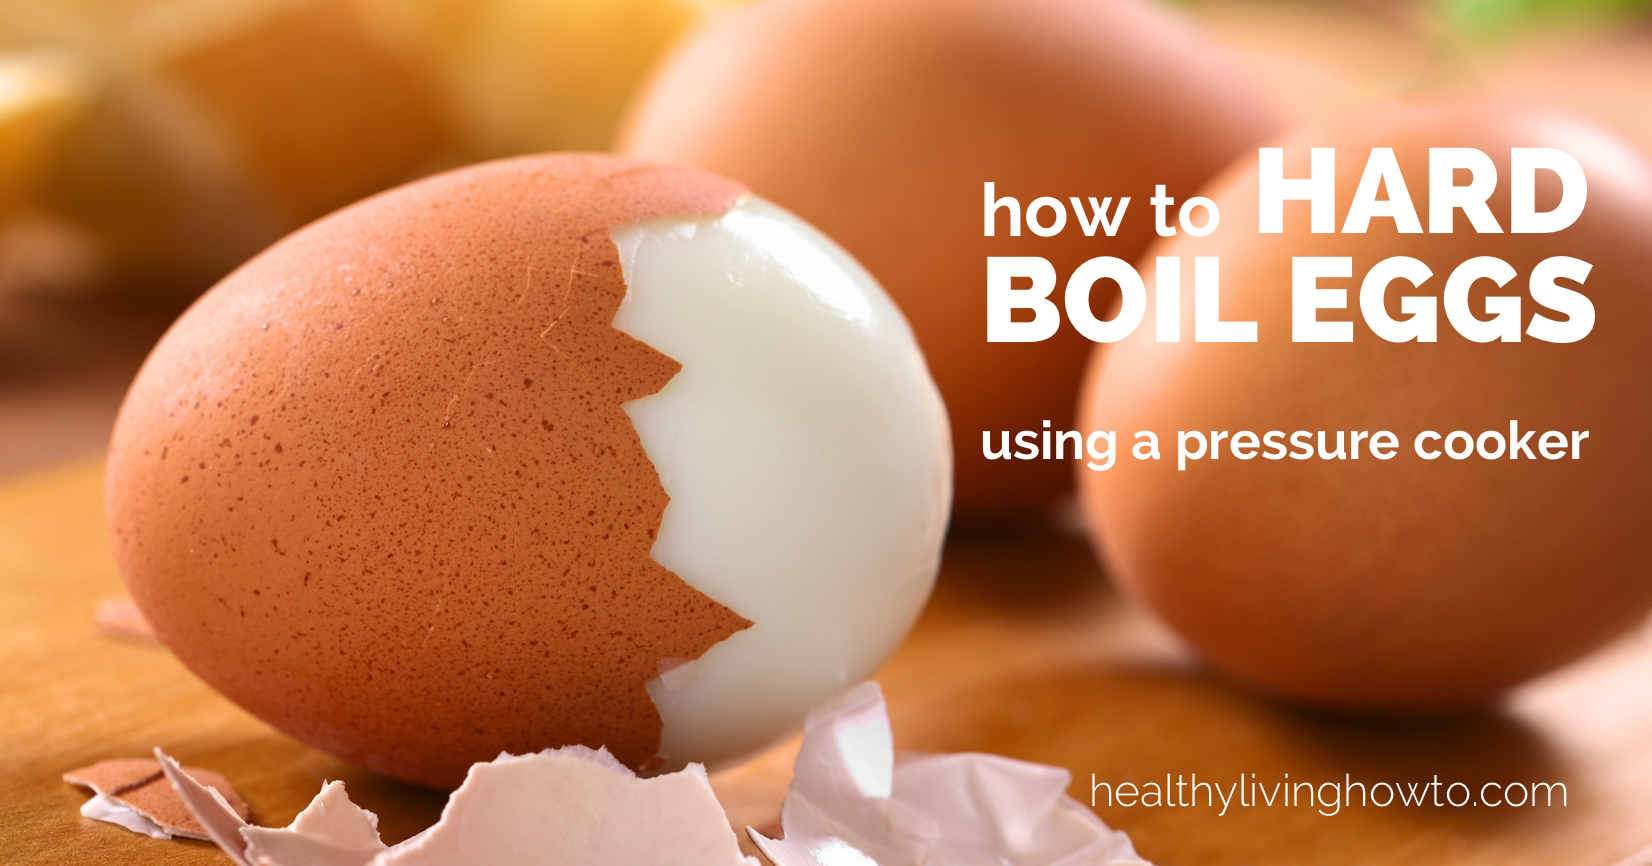 How To Hard Boil Eggs Using A Pressure Cooker | healthylivinghowto.com